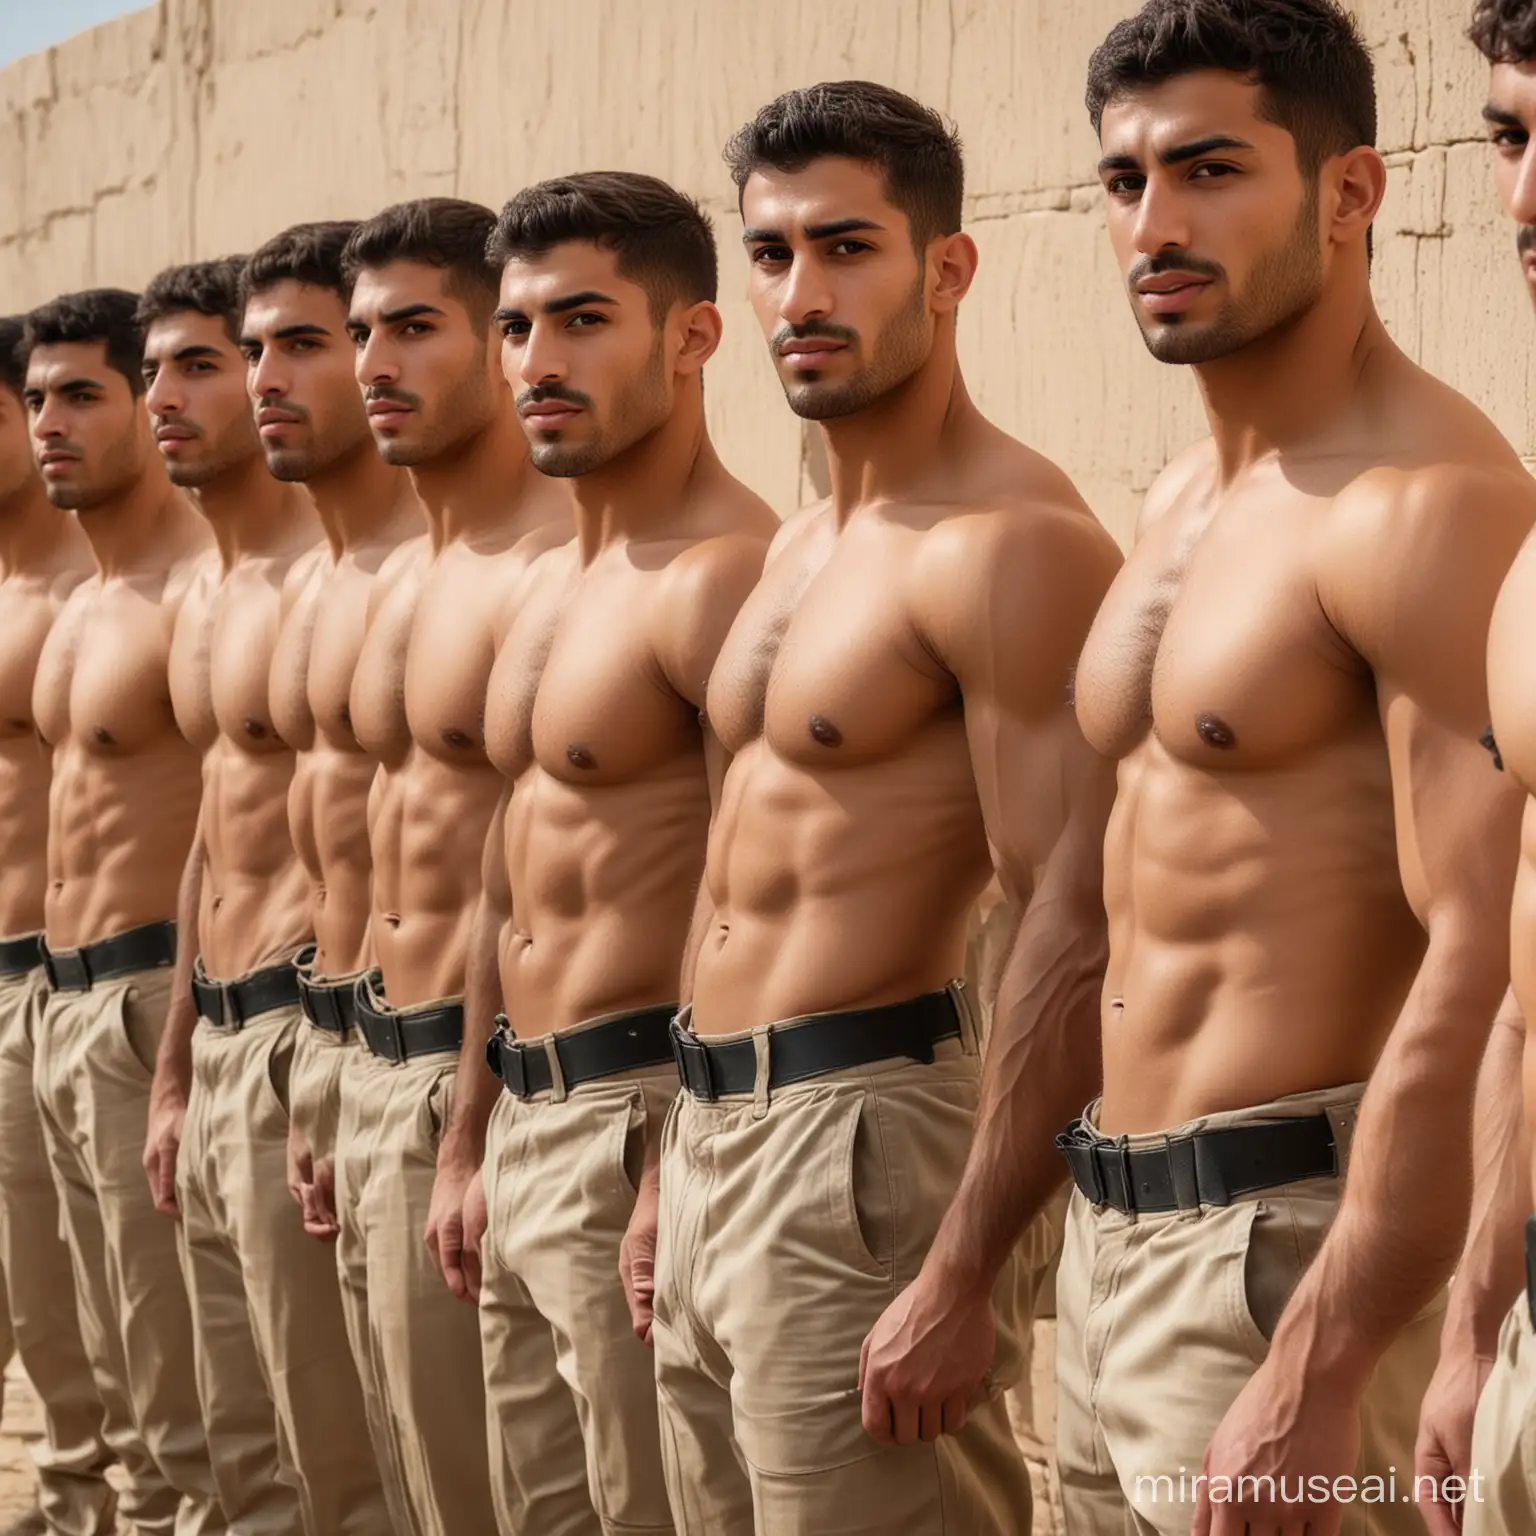 A group of hot handsome, brawny middle eastern male soldiers, age 22{, shirtless, lined up